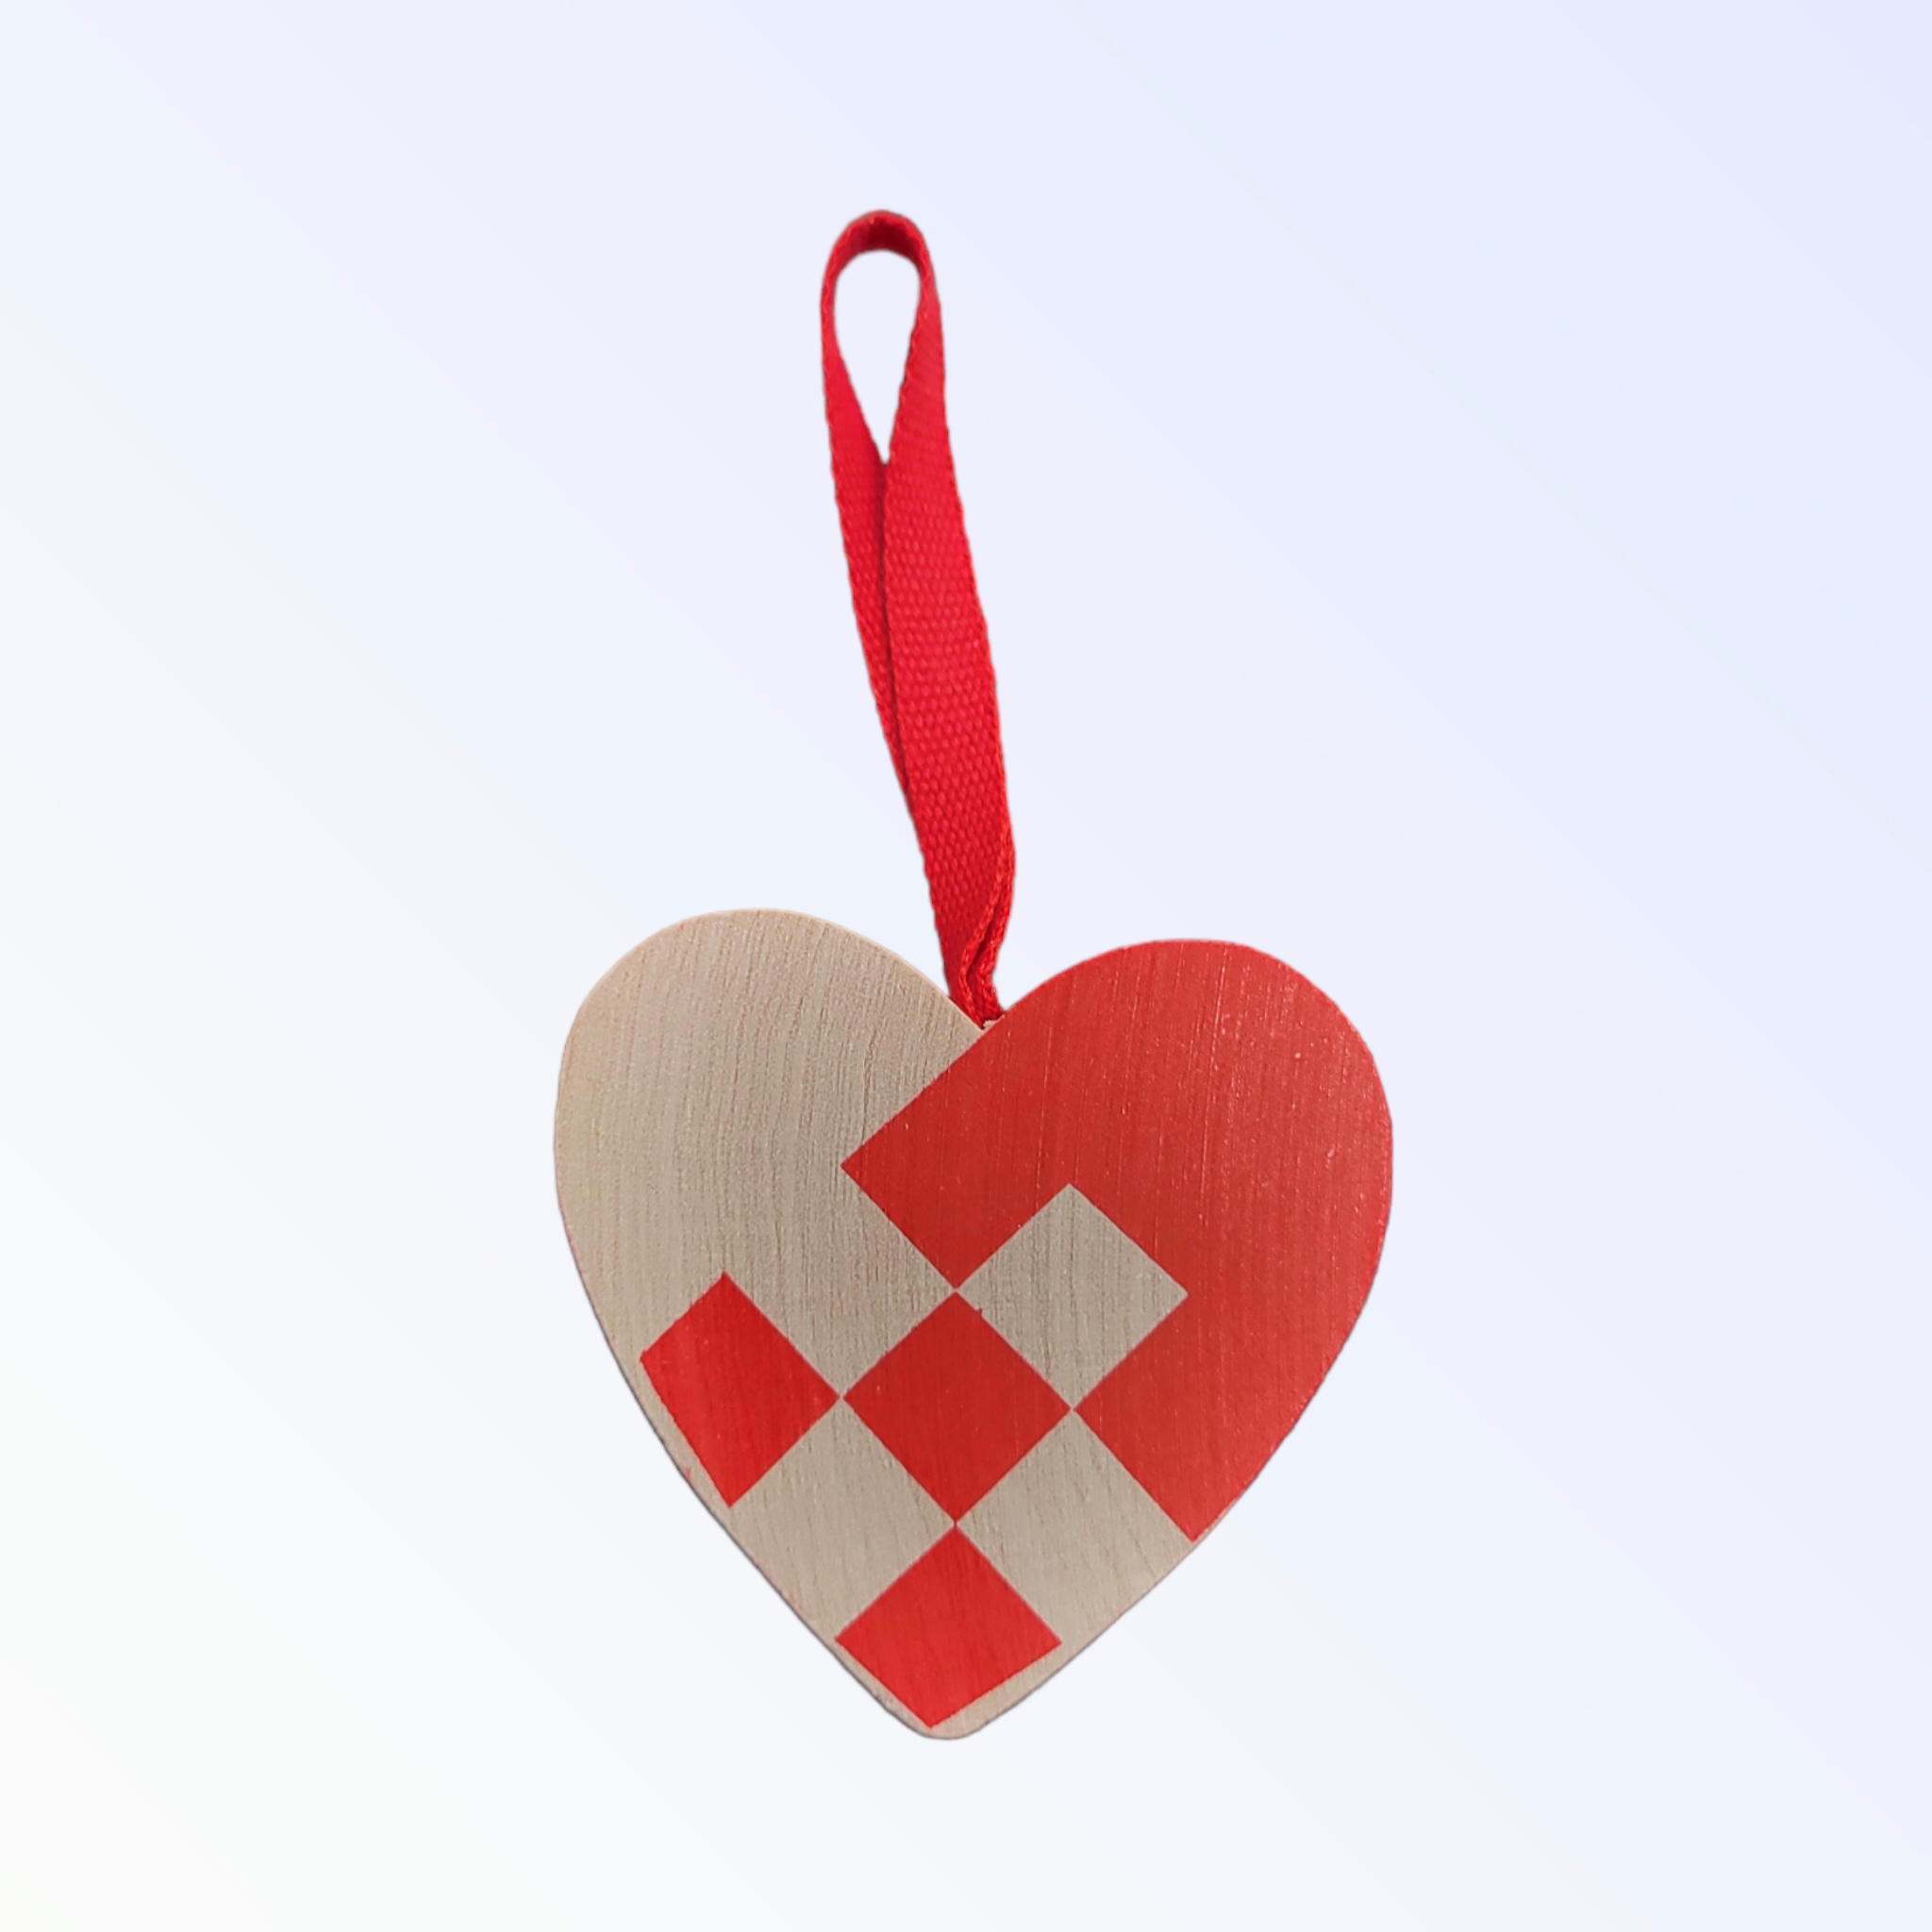 Ornament: 2" Red Woven Heart Basket